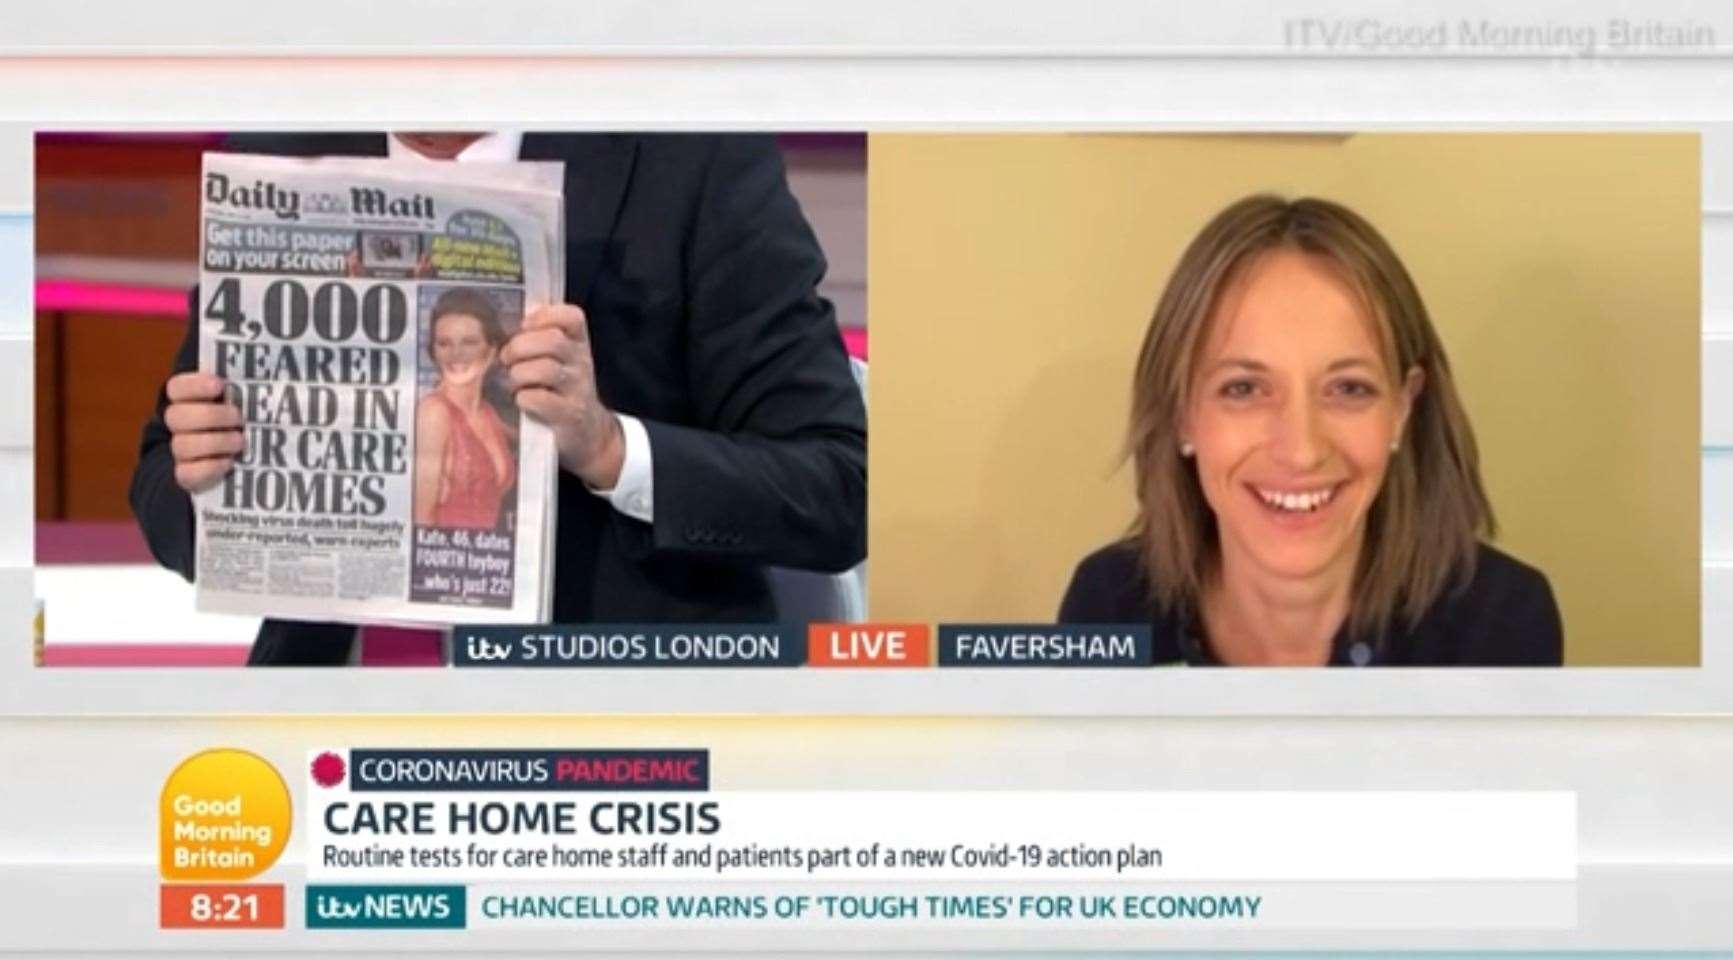 MP Helen Whately was accused of laughing by Piers Morgan during a previous car-crash interview on Good Morning Britain. Picture: ITV